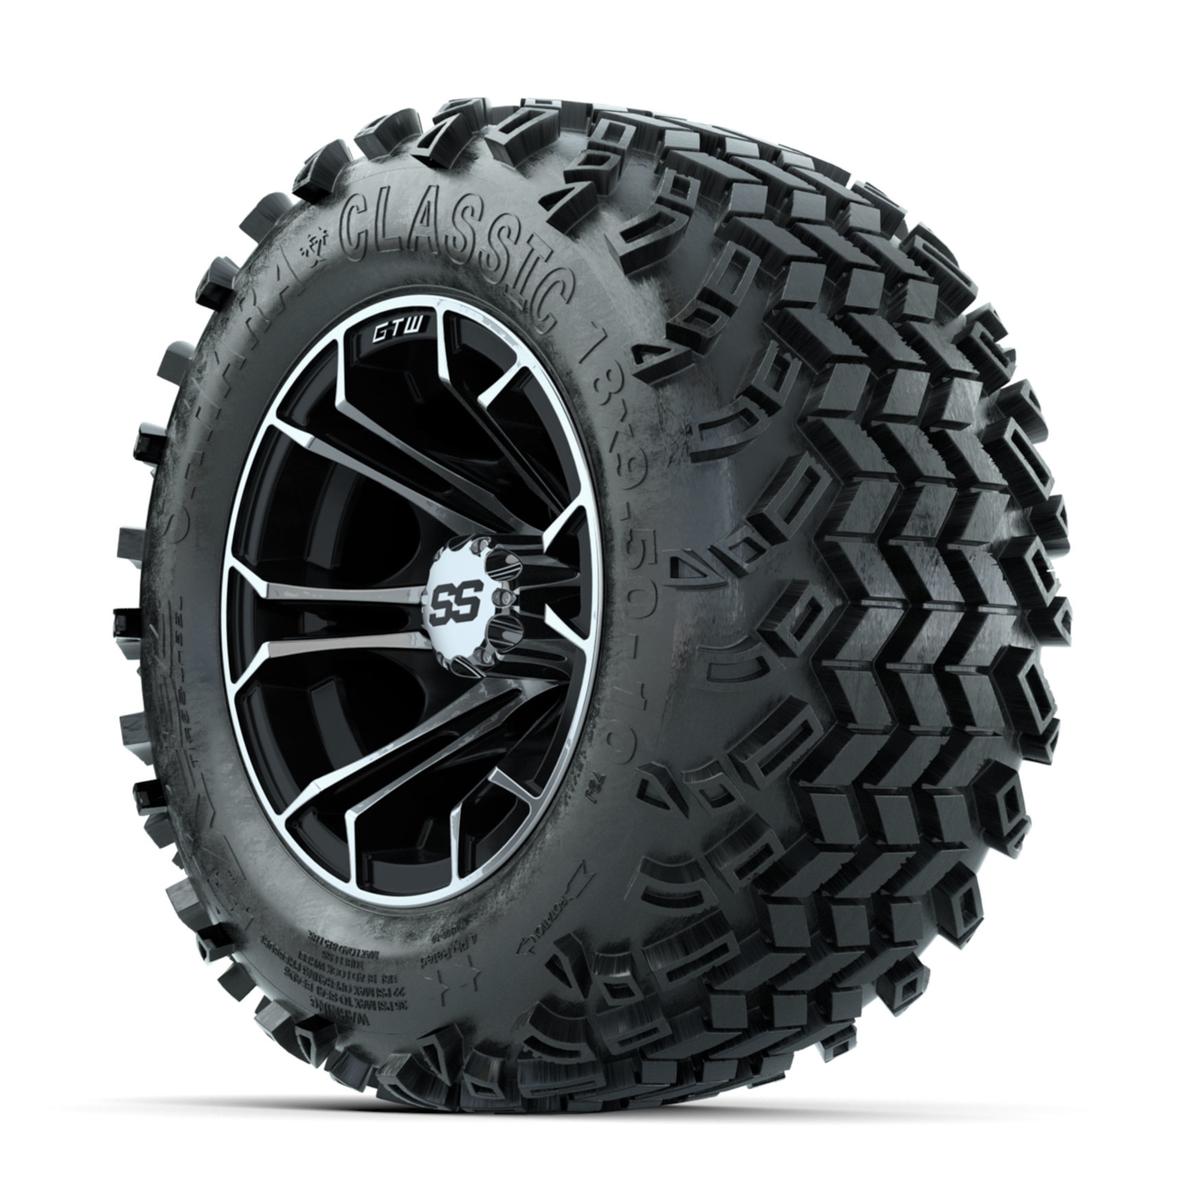 GTW Spyder Machined/Black 10 in Wheels with 18x9.50-10 Sahara Classic All Terrain Tires – Full Set